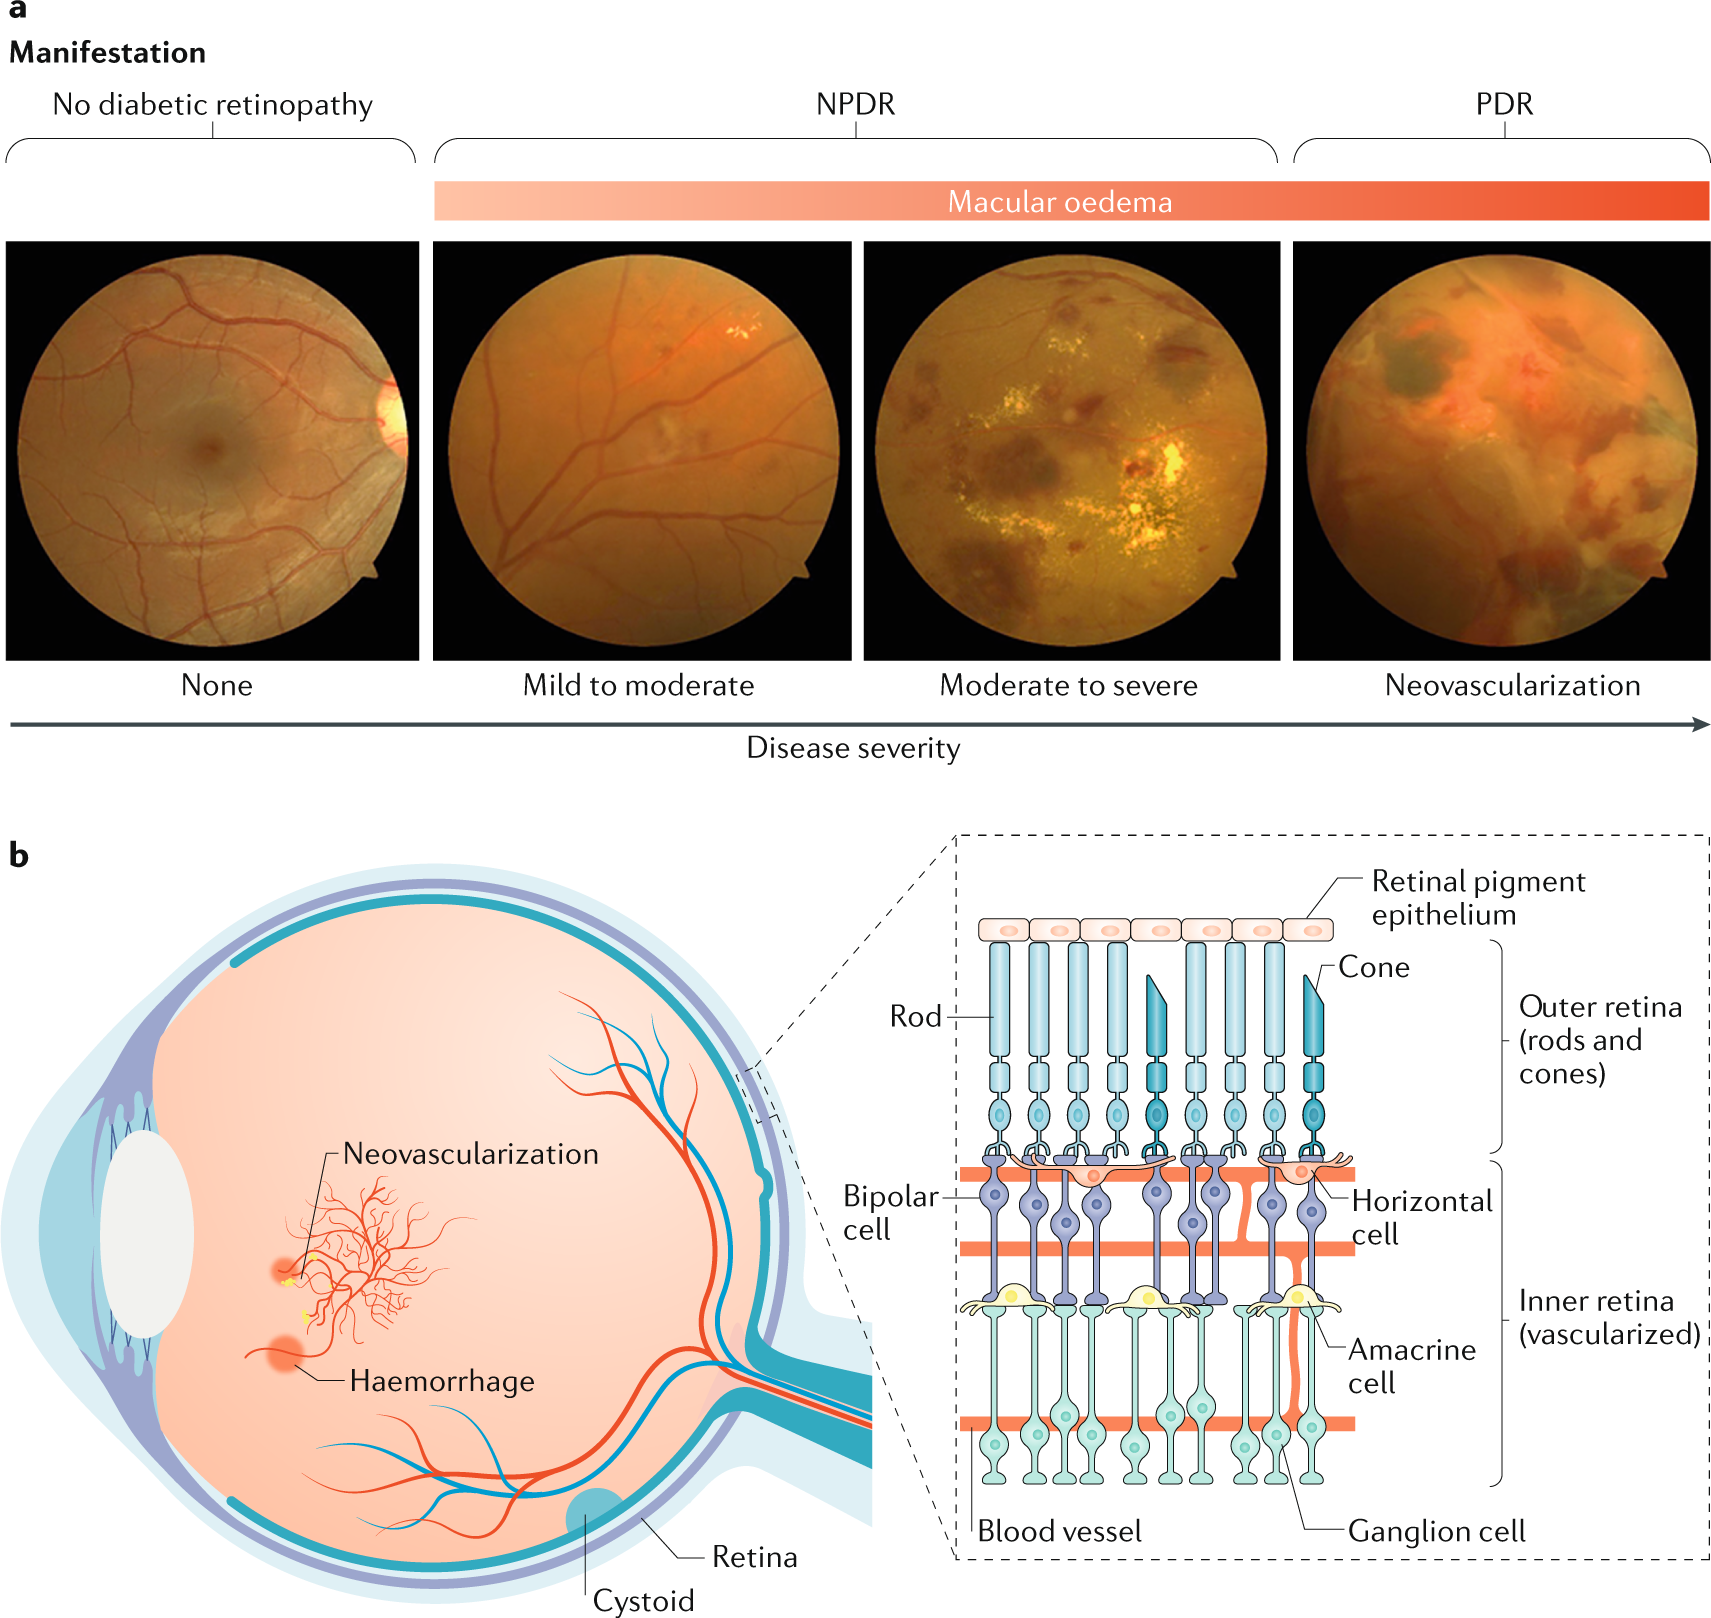 Diabetes and diabetic retinopathy in people aged 50 years and older in Hungary